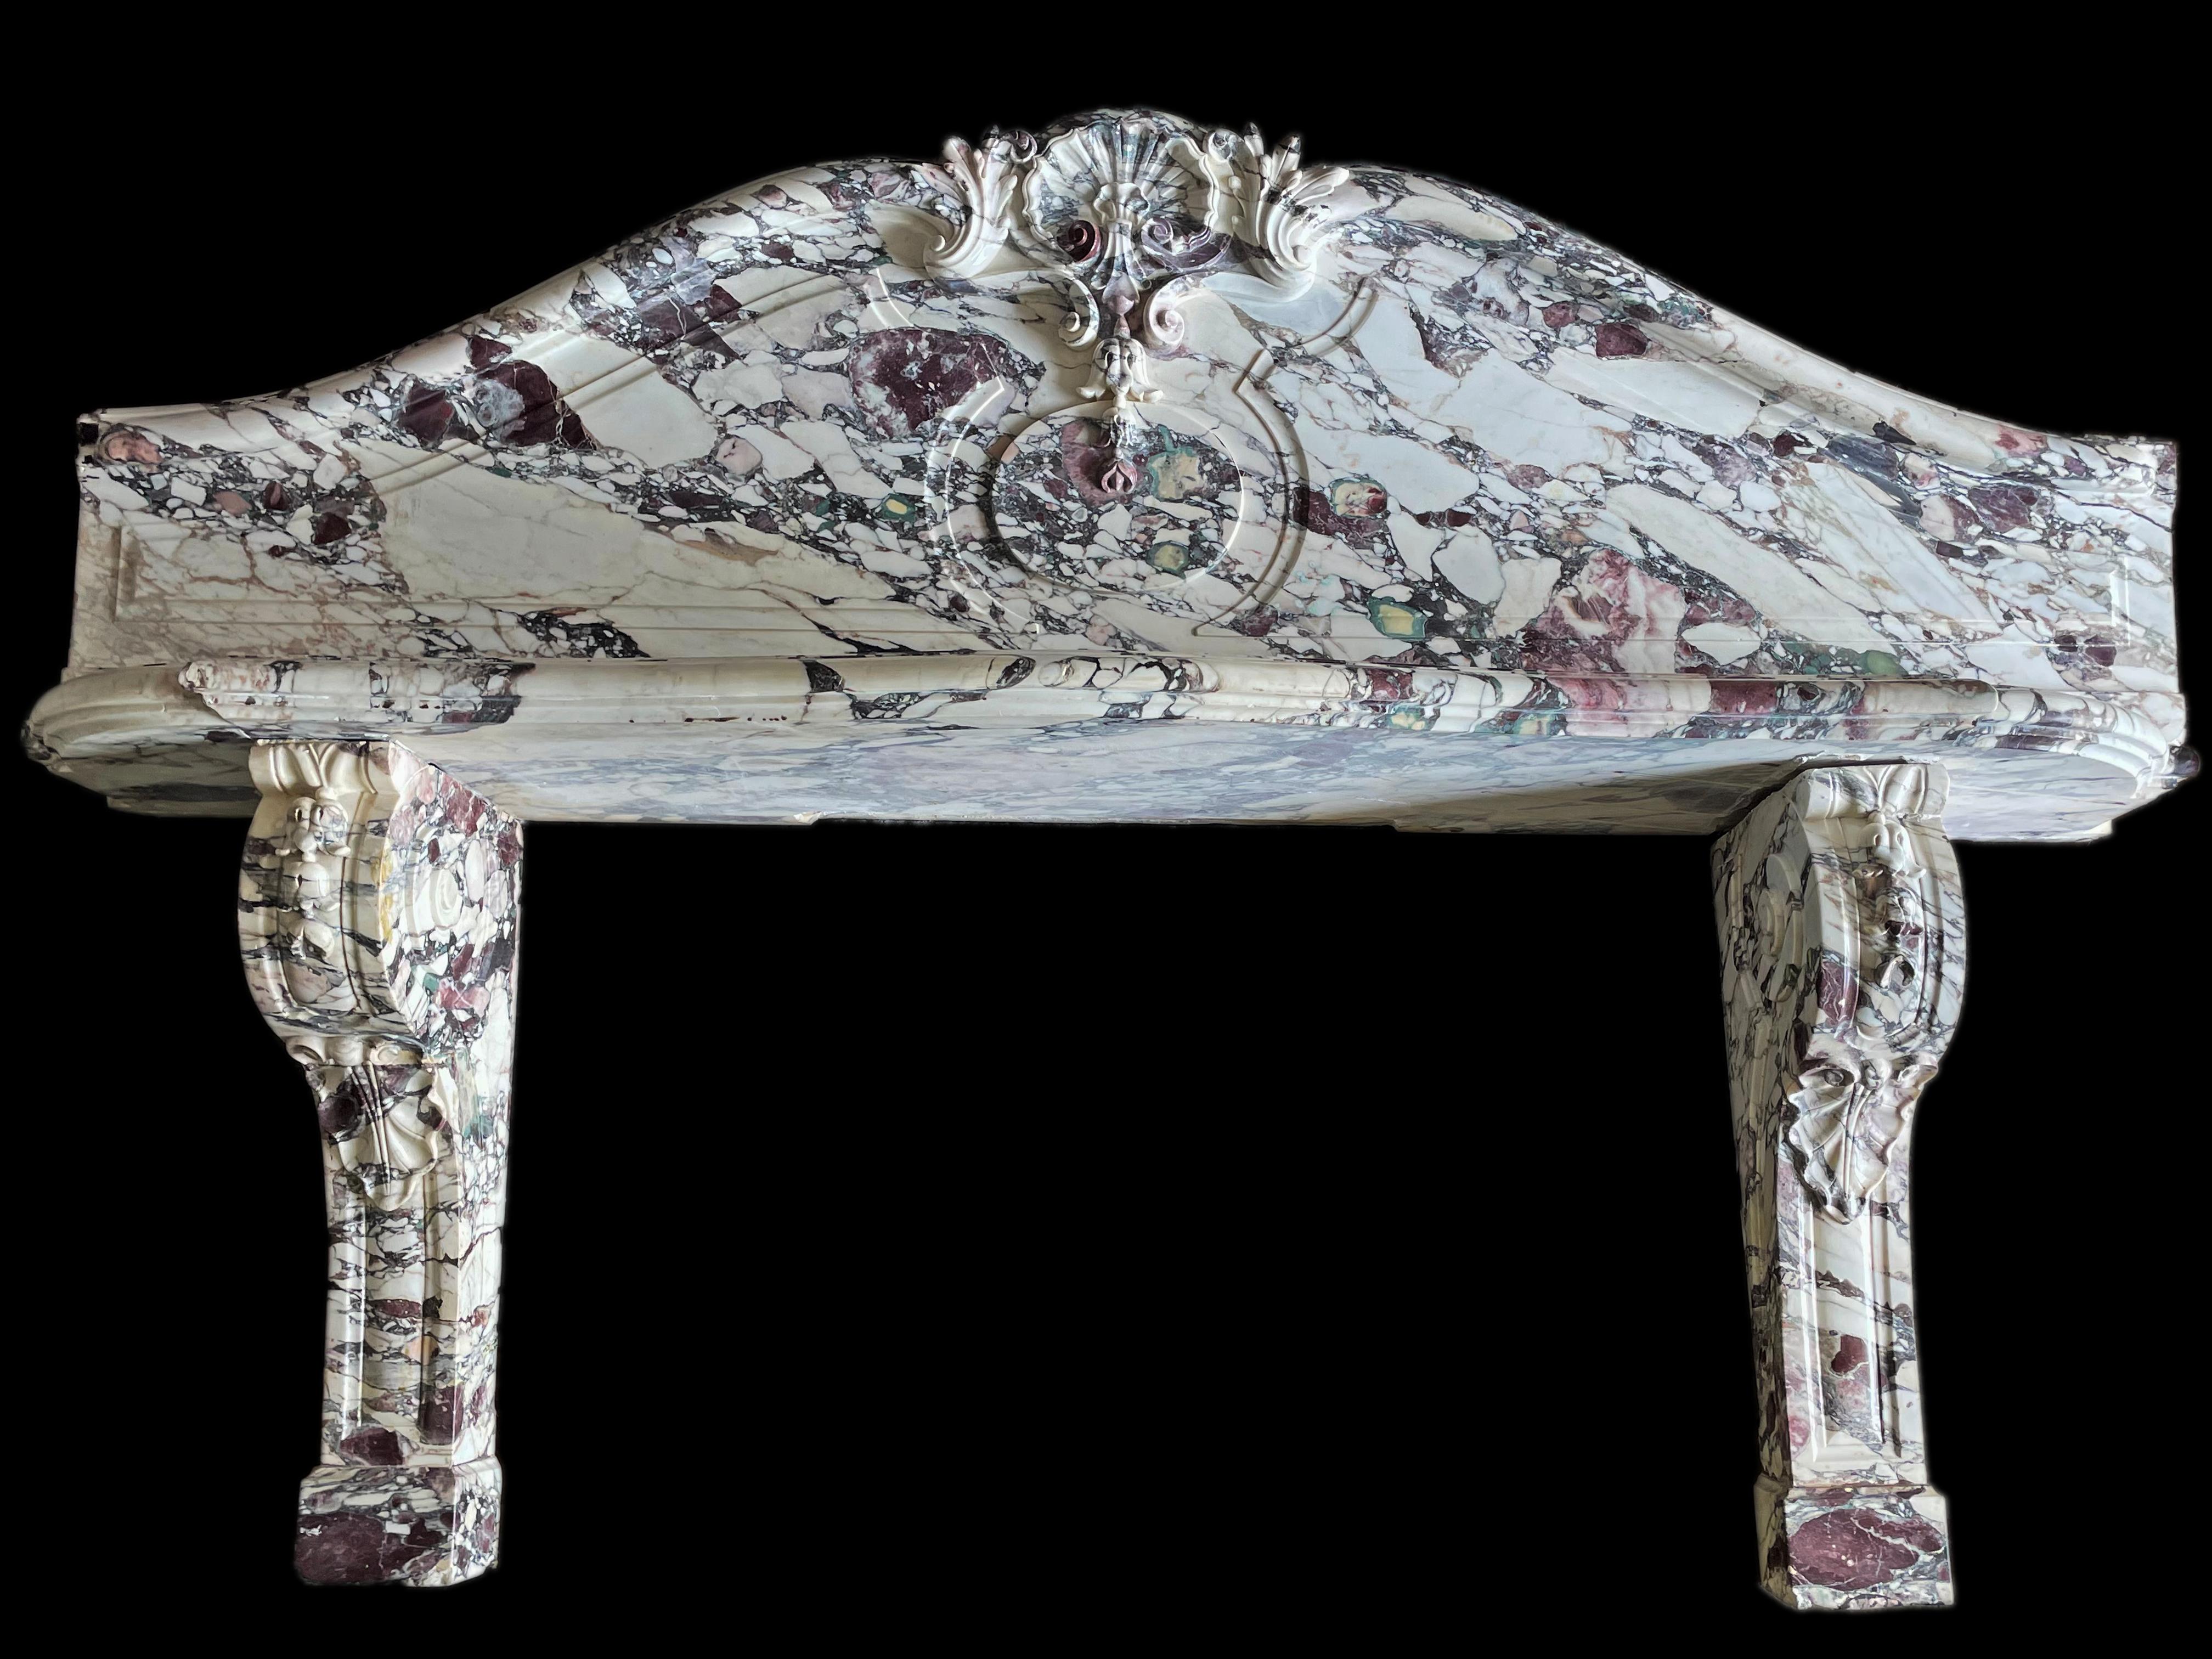 An Impressive and Monumental 19th Century European Elaborately Carved Italian Carrera Viola marble mantel surround with white and purple veining throughout with intricately hand carved scroll legs with carved shelf and carved frieze in classic 19th